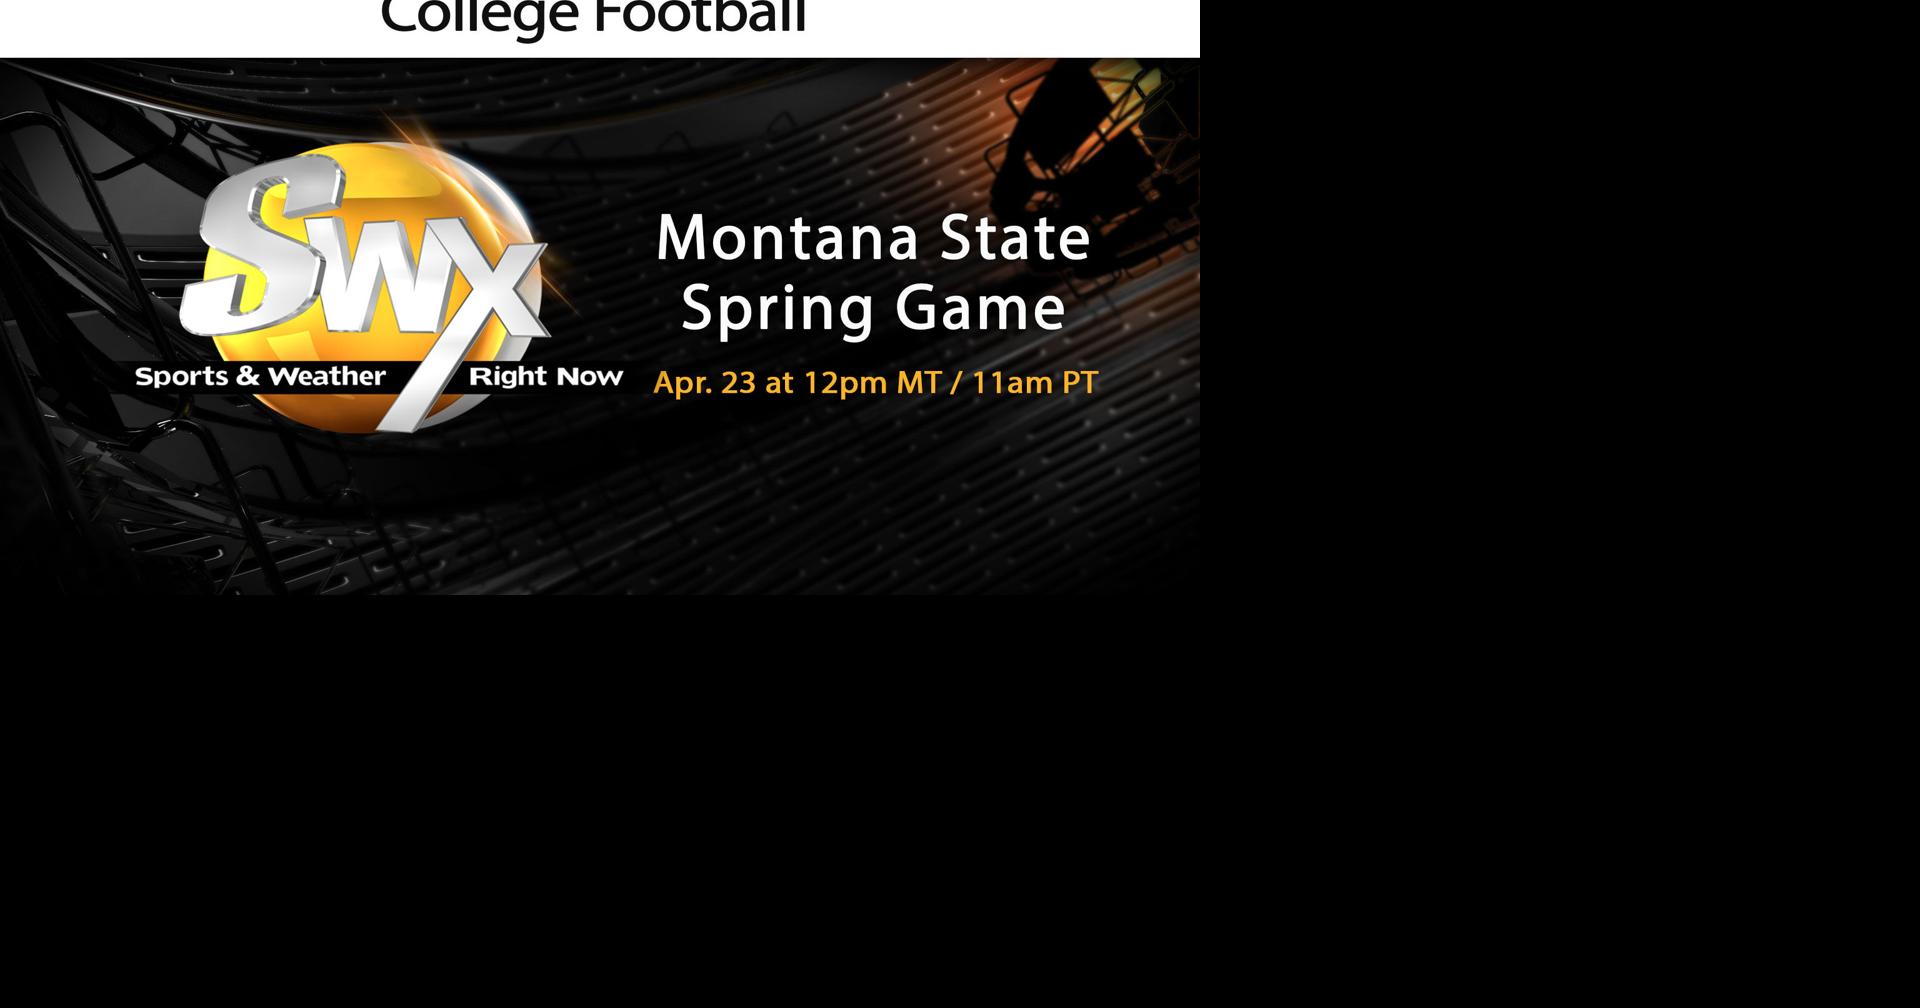 College Football Montana State Spring Game